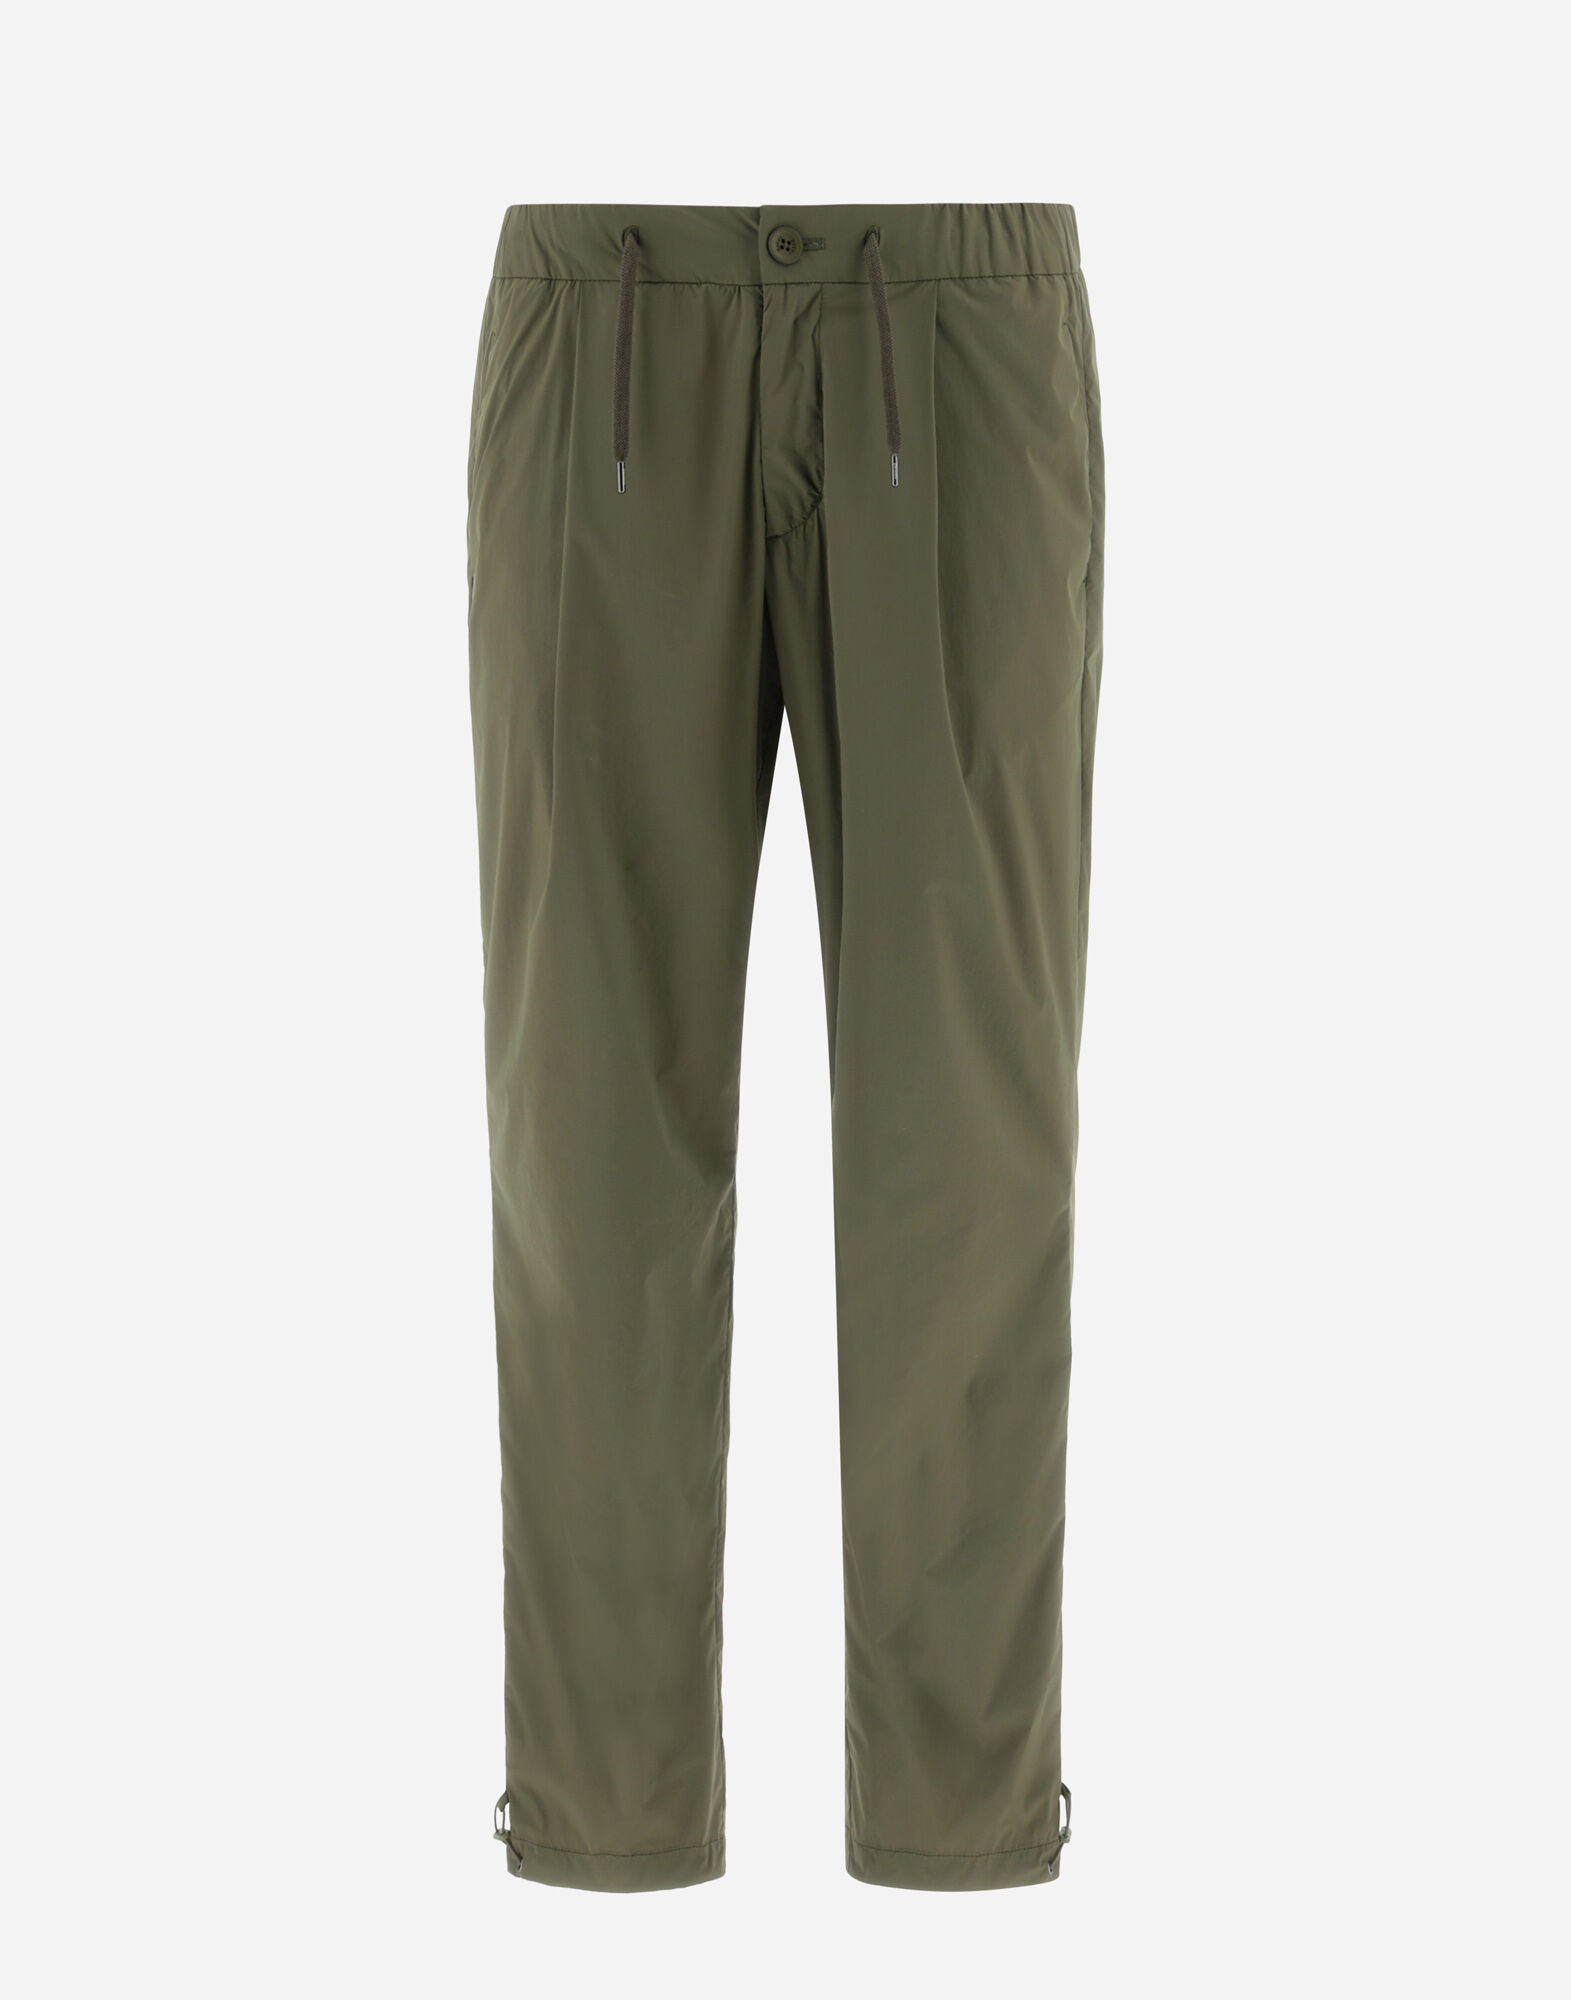 French Army - Waterproof Nylon Trousers – Olive Green - Super Grade -  Forces Uniform and Kit